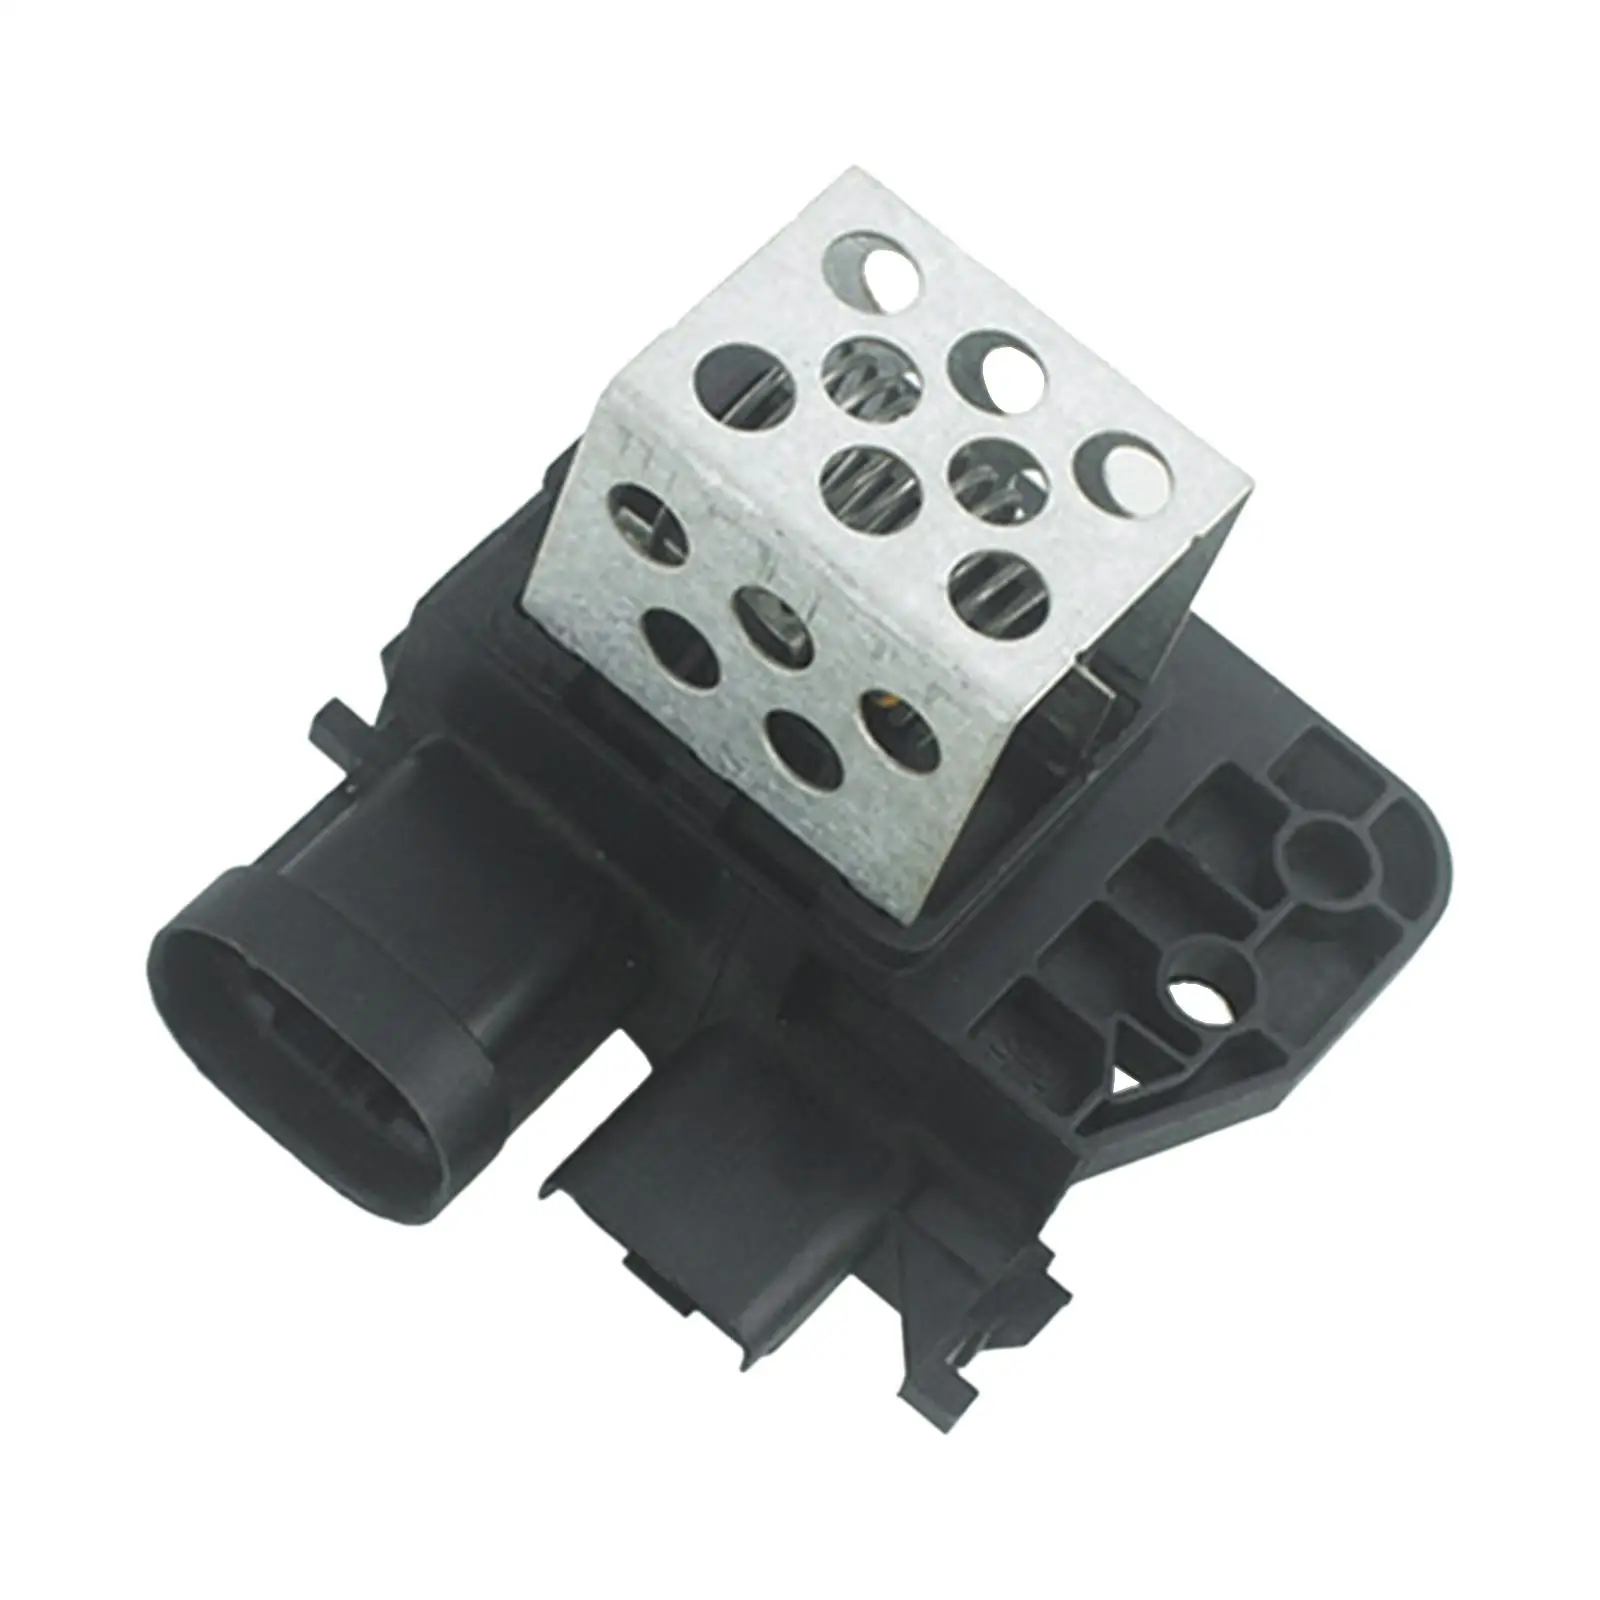 Heater Blower Motor Resistance Radiator Fan Resistance 9673999980 for Peugeot Spare Parts Replacement High Performance